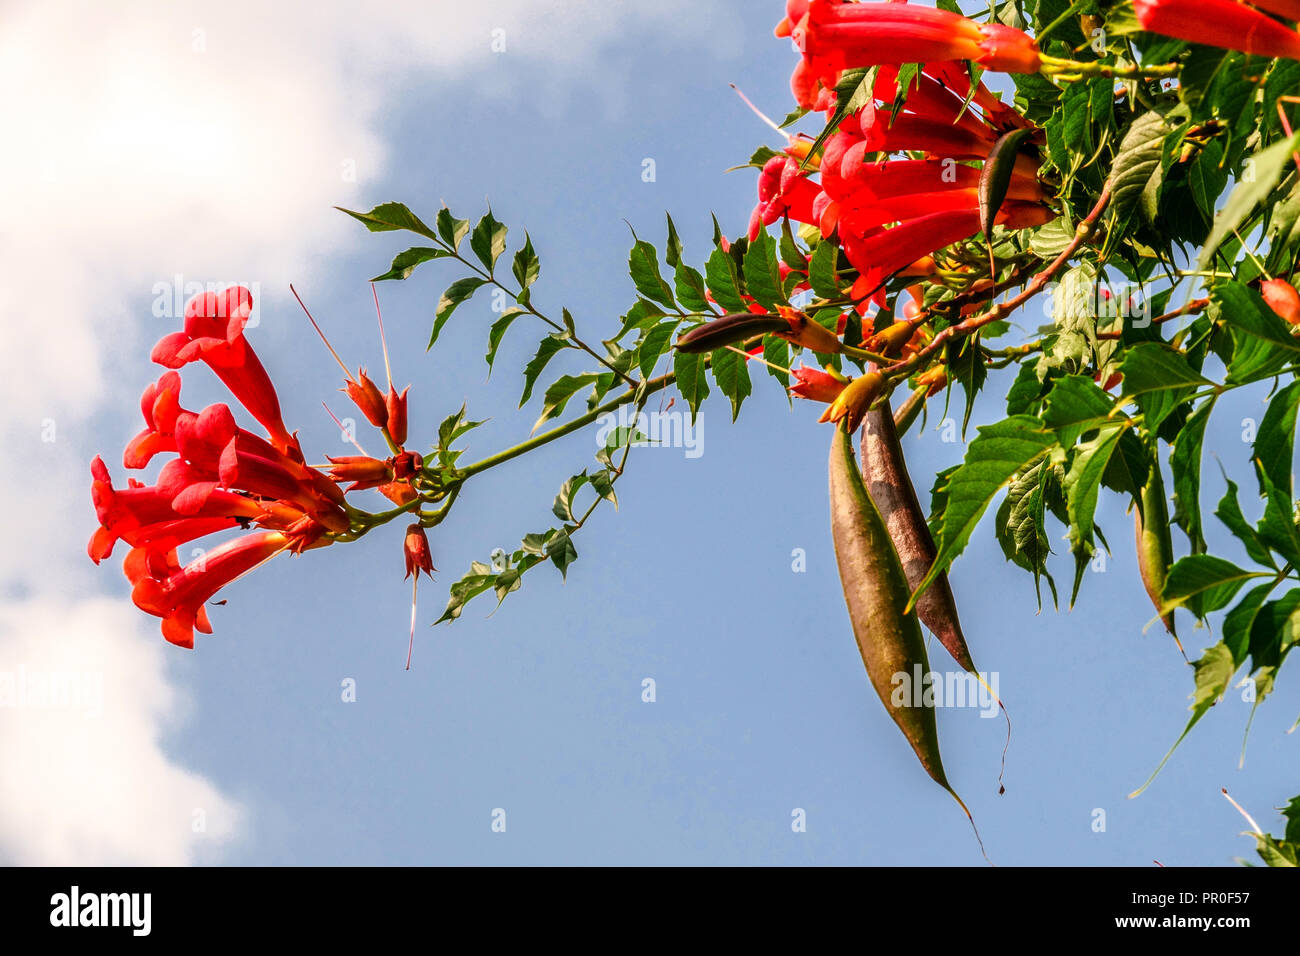 Campsis radicans Climbing Plant Garden Red Trumpet vine Pods Trumpet creeper Flowers Climber Ripening Fruits Ripe Seed Pods on Branches Blooming Stock Photo